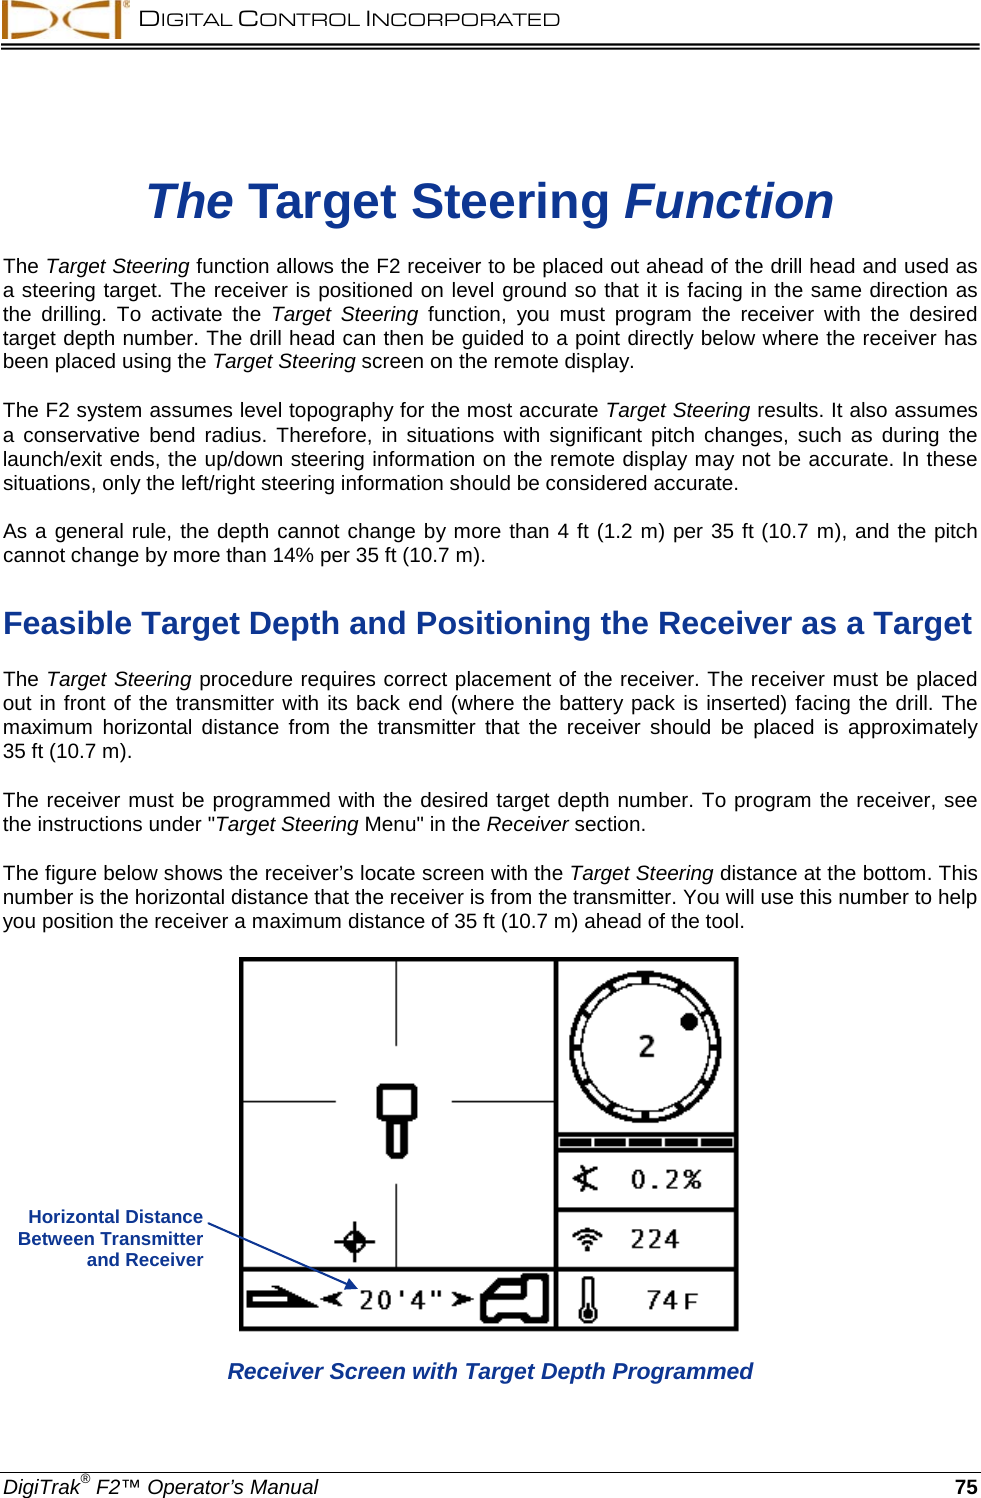  DIGITAL CONTROL INCORPORATED  DigiTrak® F2™ Operator’s Manual 75 The Target Steering Function The Target Steering function allows the F2 receiver to be placed out ahead of the drill head and used as a steering target. The receiver is positioned on level ground so that it is facing in the same direction as the  drilling.  To activate the Target Steering function, you must program the receiver with the desired target depth number. The drill head can then be guided to a point directly below where the receiver has been placed using the Target Steering screen on the remote display. The F2 system assumes level topography for the most accurate Target Steering results. It also assumes a conservative bend radius. Therefore,  in  situations  with  significant pitch changes,  such as during the launch/exit ends, the up/down steering information on the remote display may not be accurate. In these situations, only the left/right steering information should be considered accurate.  As a general rule, the depth cannot change by more than 4 ft (1.2 m) per 35 ft (10.7 m), and the pitch cannot change by more than 14% per 35 ft (10.7 m).   Feasible Target Depth and Positioning the Receiver as a Target The Target Steering procedure requires correct placement of the receiver. The receiver must be placed out in front of the transmitter with its back end (where the battery pack is inserted) facing the drill. The maximum horizontal distance from the transmitter that the receiver should be placed is approximately  35 ft (10.7 m).  The receiver must be programmed with the desired target depth number. To program the receiver, see the instructions under &quot;Target Steering Menu&quot; in the Receiver section. The figure below shows the receiver’s locate screen with the Target Steering distance at the bottom. This number is the horizontal distance that the receiver is from the transmitter. You will use this number to help you position the receiver a maximum distance of 35 ft (10.7 m) ahead of the tool.    Receiver Screen with Target Depth Programmed Horizontal Distance Between Transmitter and Receiver  